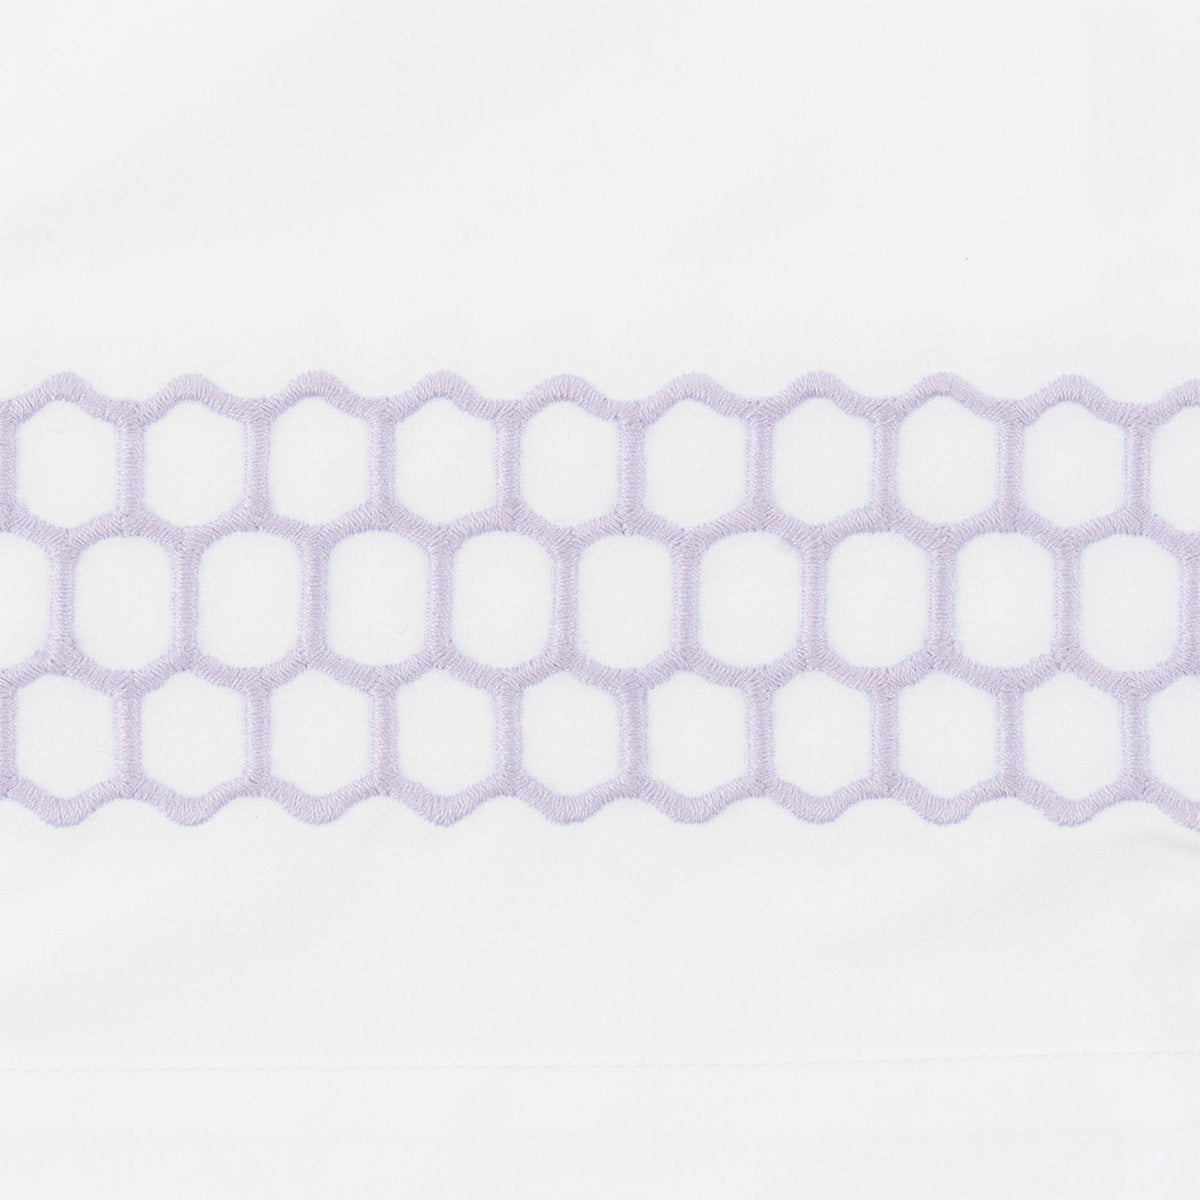 Swatch Sample of  Matouk Liana Bedding in Lavender Color